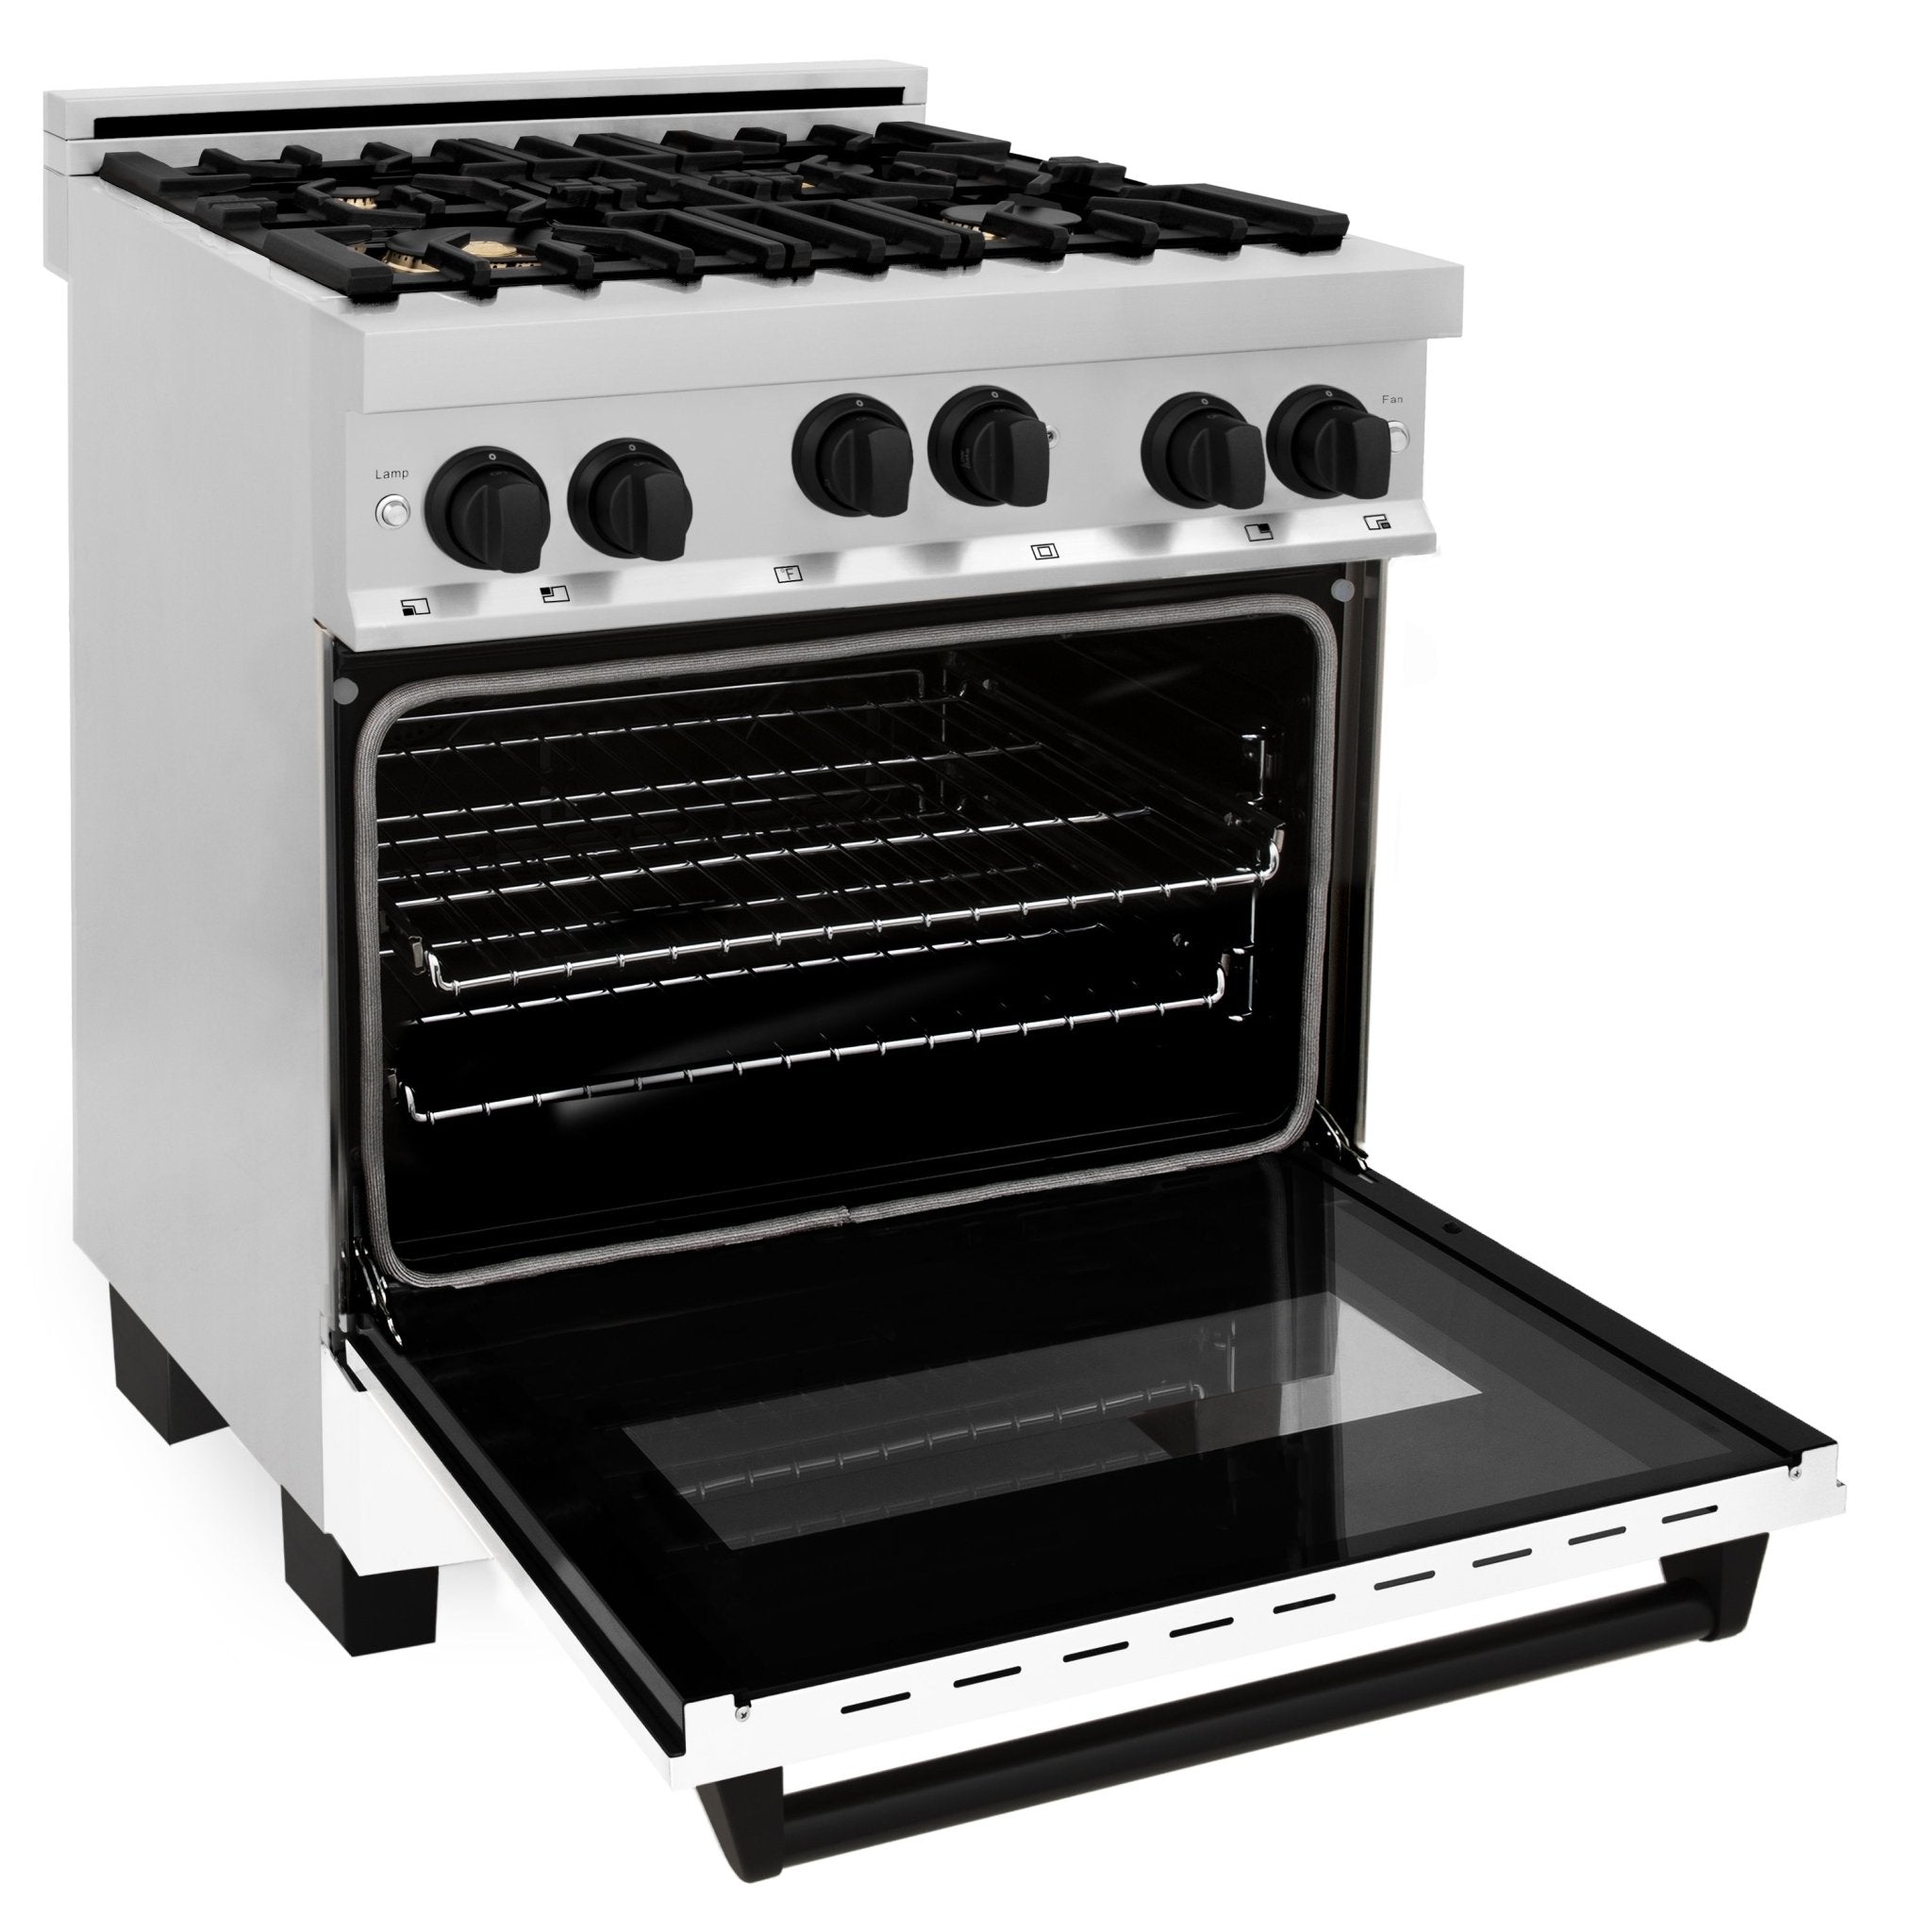 ZLINE Autograph Edition 30" 4.0 cu. ft. Range with Gas Stove and Gas Oven in Stainless Steel with White Matte Door and Matte Black Accents (RGZ-WM-30-MB) - Rustic Kitchen & Bath - Ranges - ZLINE Kitchen and Bath